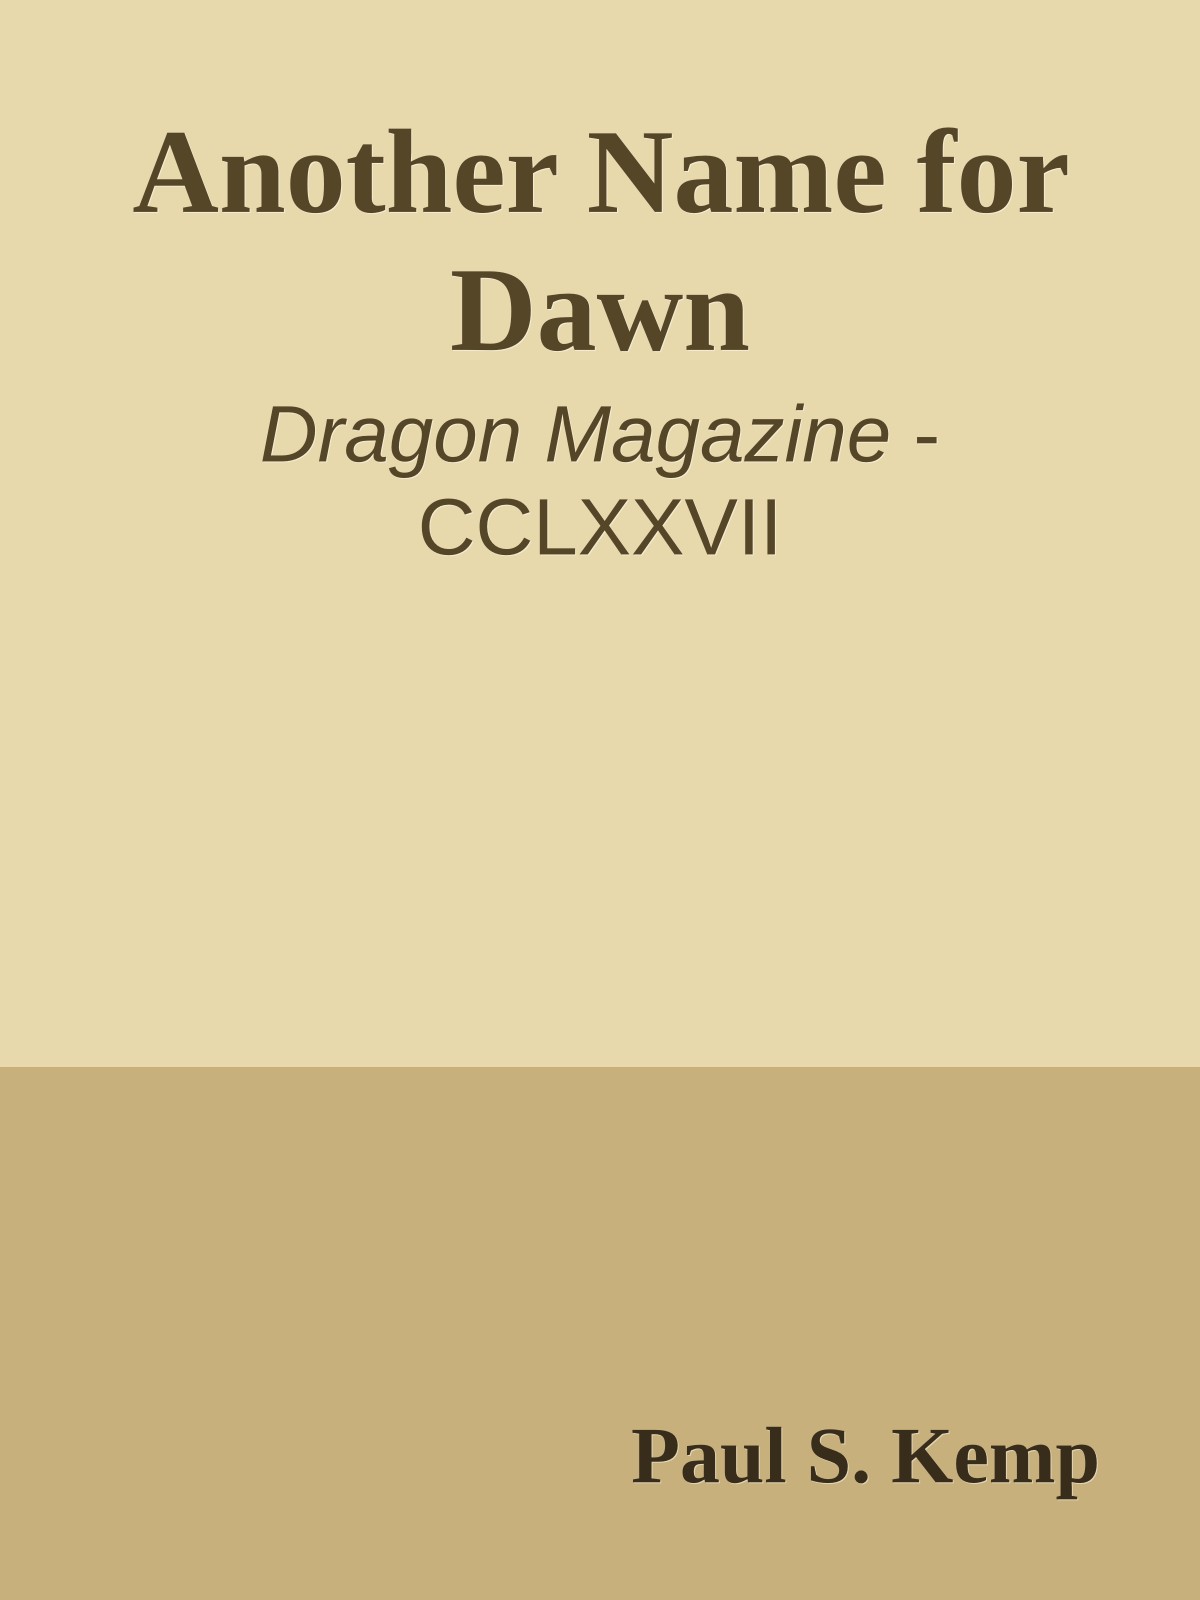 Another Name for Dawn